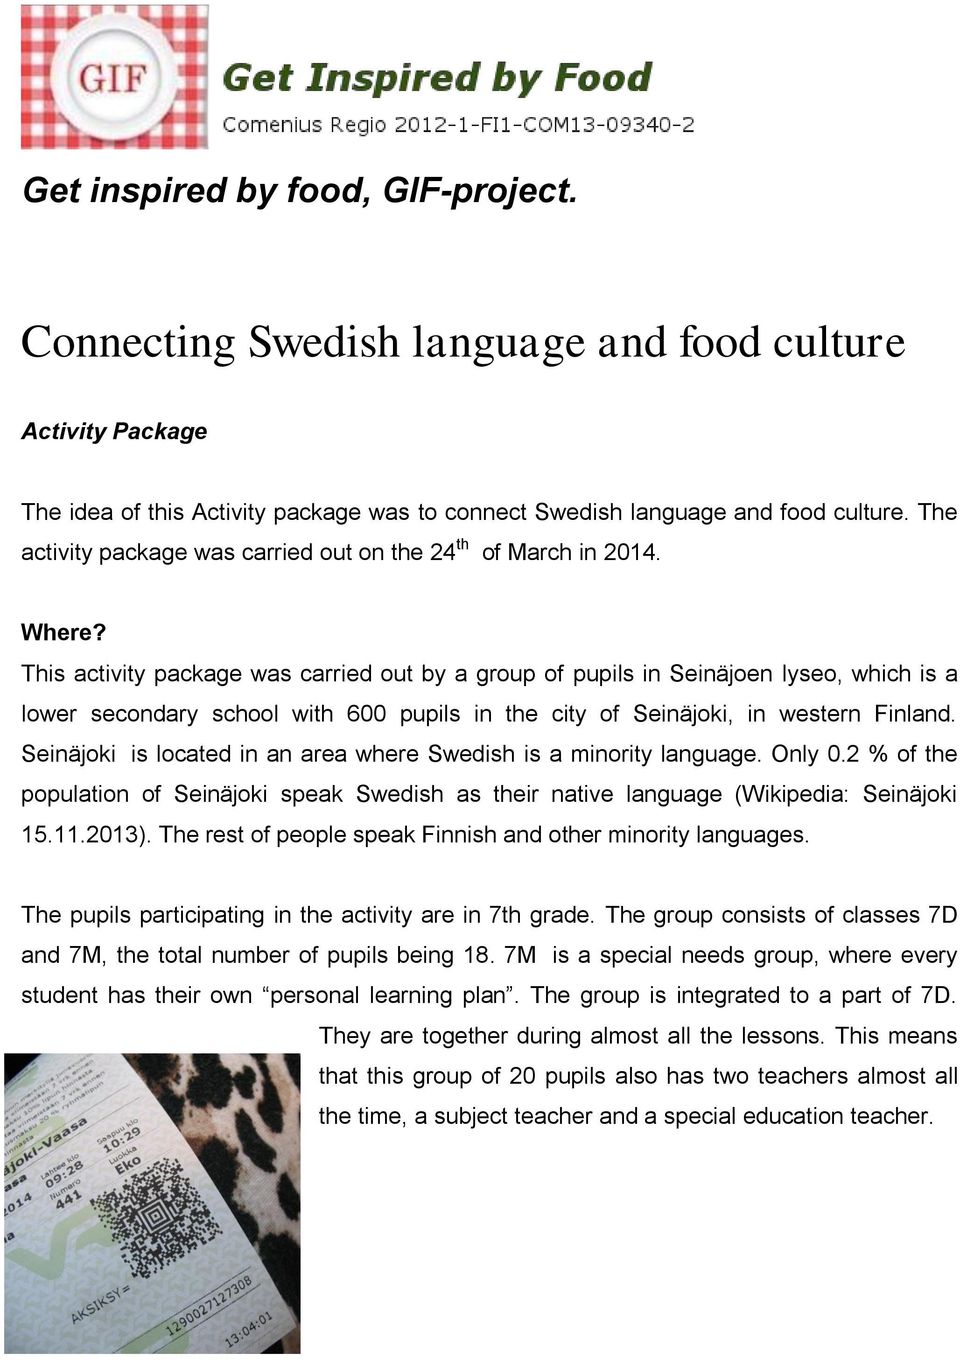 This activity package was carried out by a group of pupils in Seinäjoen lyseo, which is a lower secondary school with 600 pupils in the city of Seinäjoki, in western Finland.